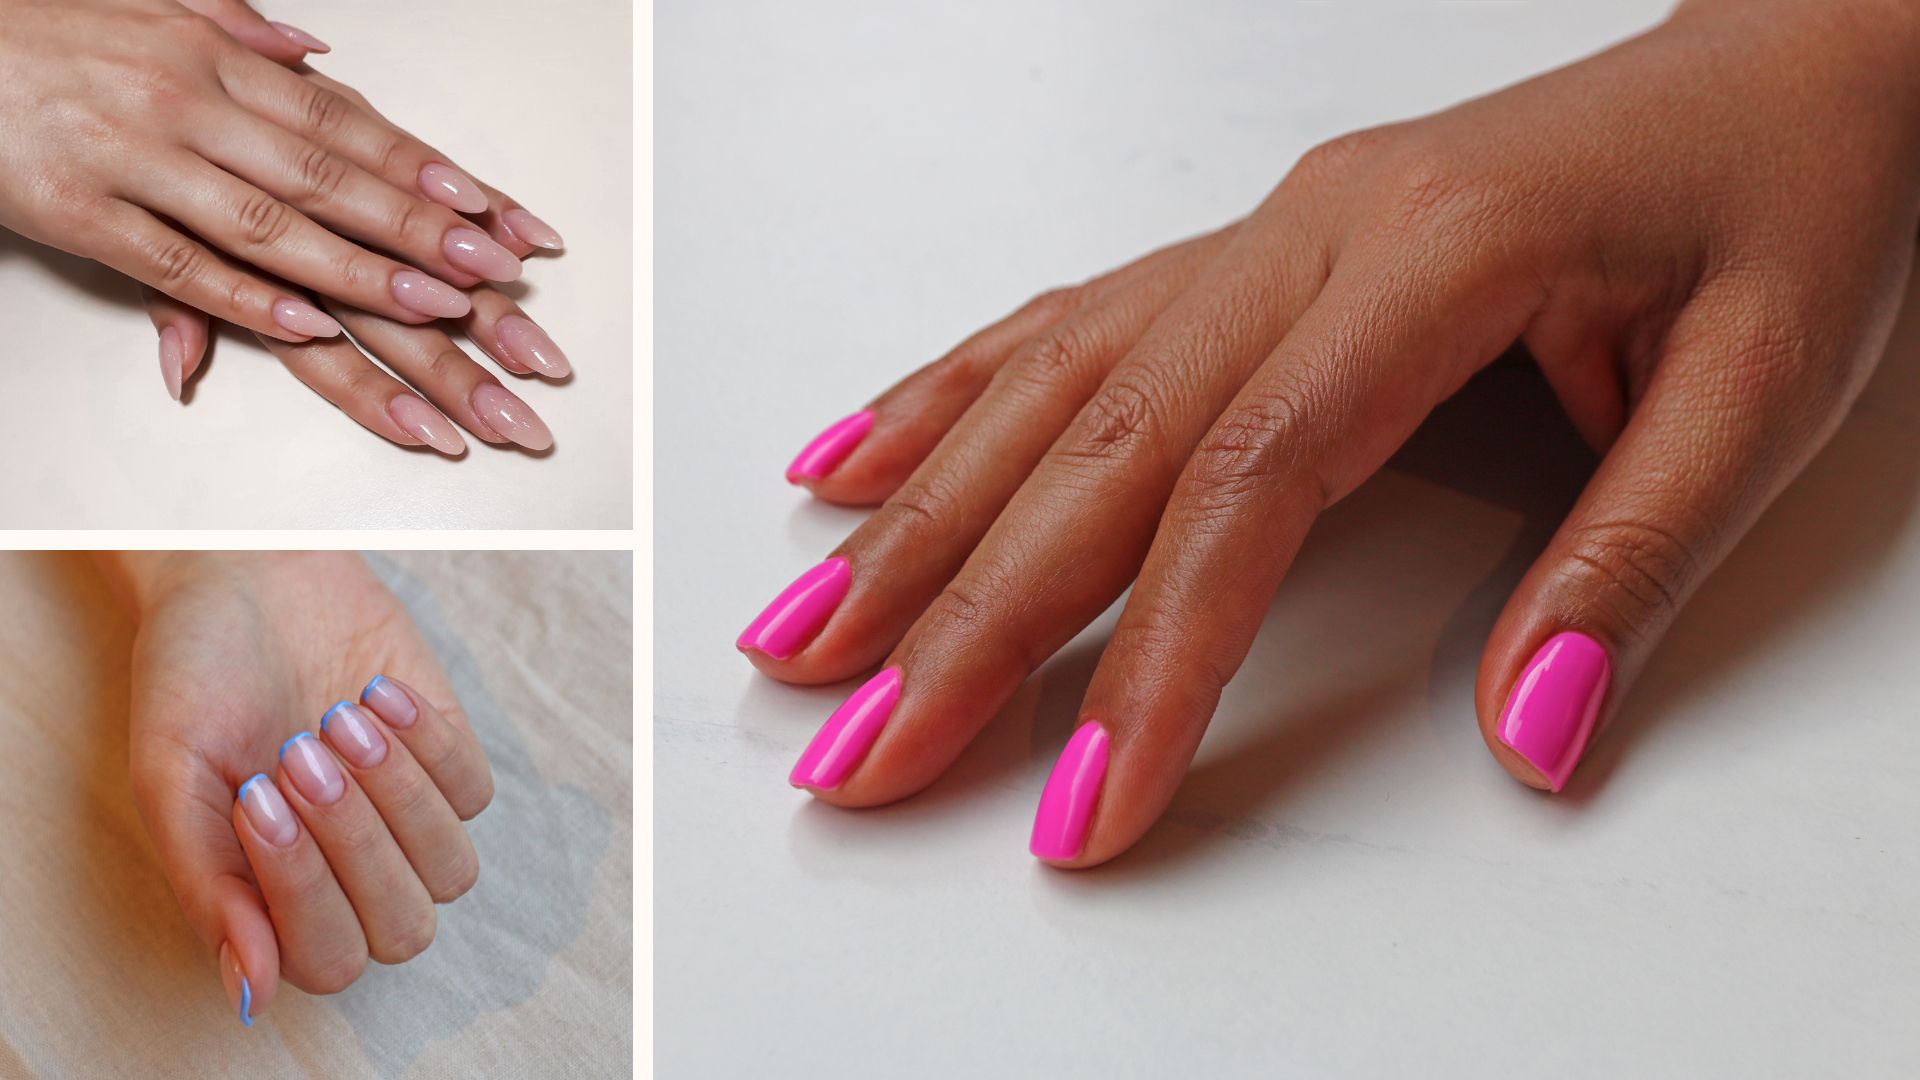 4. Neon Nail Art to Make a Statement this Summer - wide 5